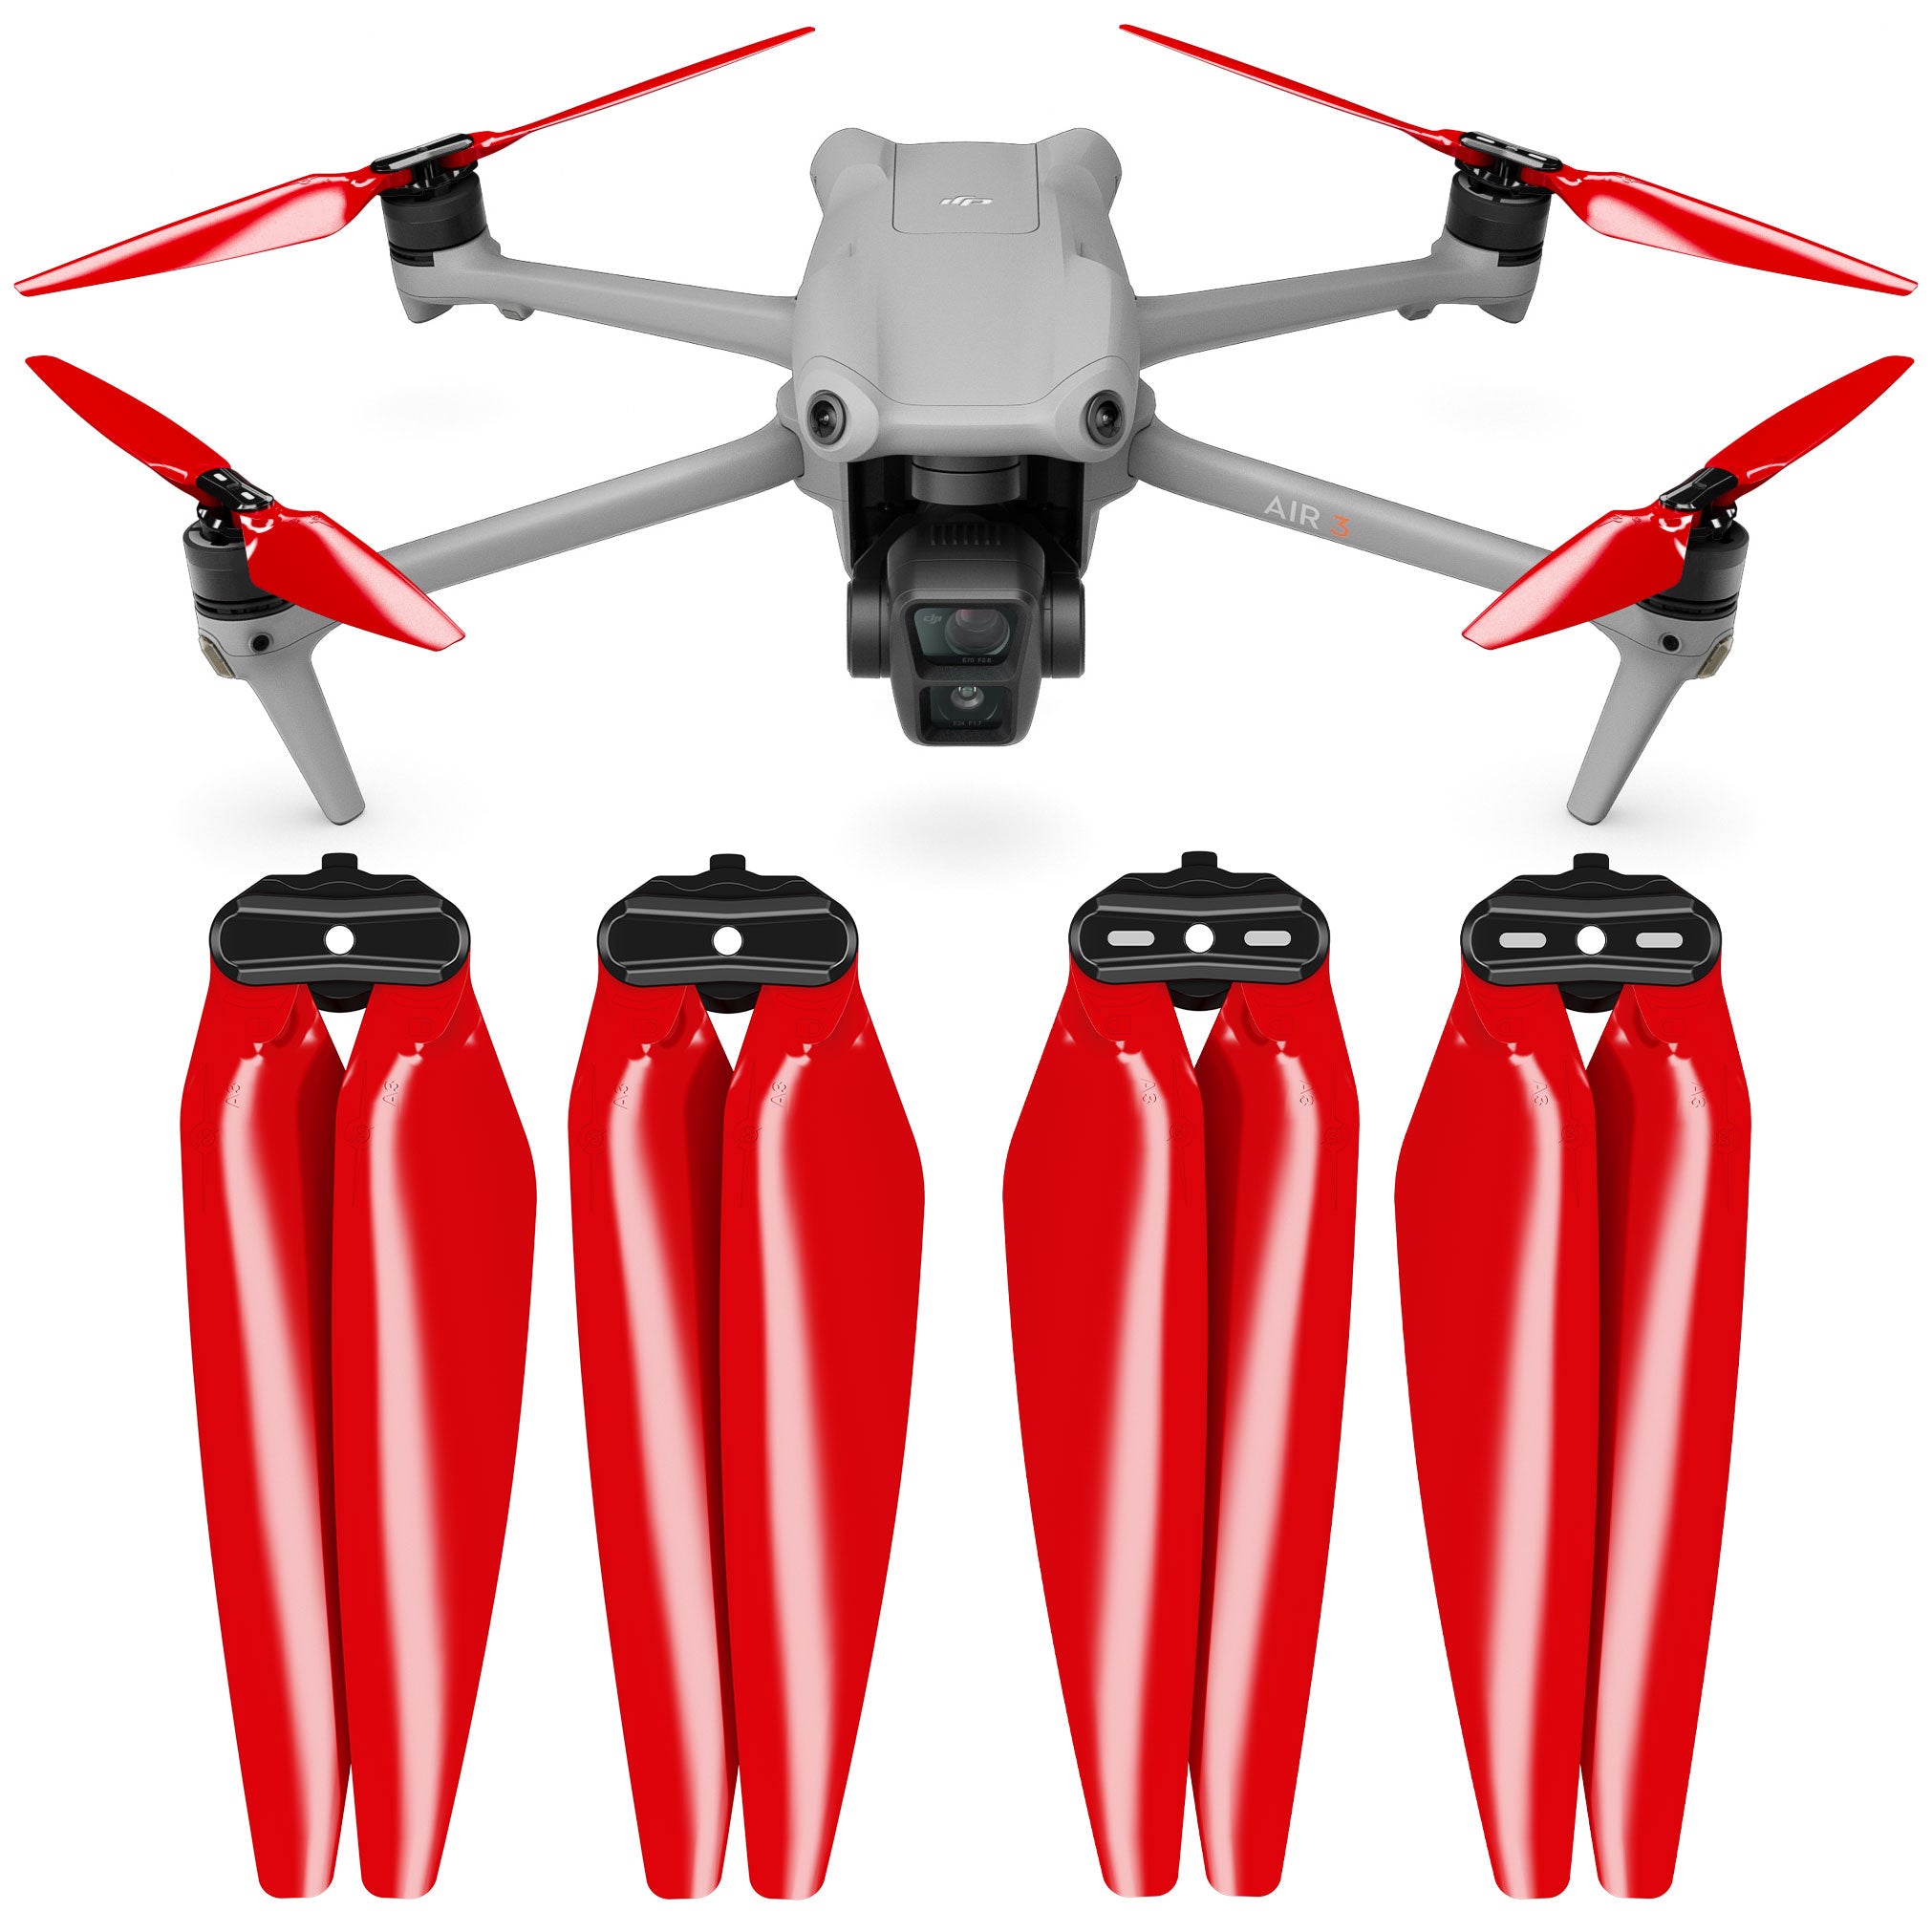 Master Airscrew Stealth Propellers for DJI Air 3 - Red, 4 Pcs